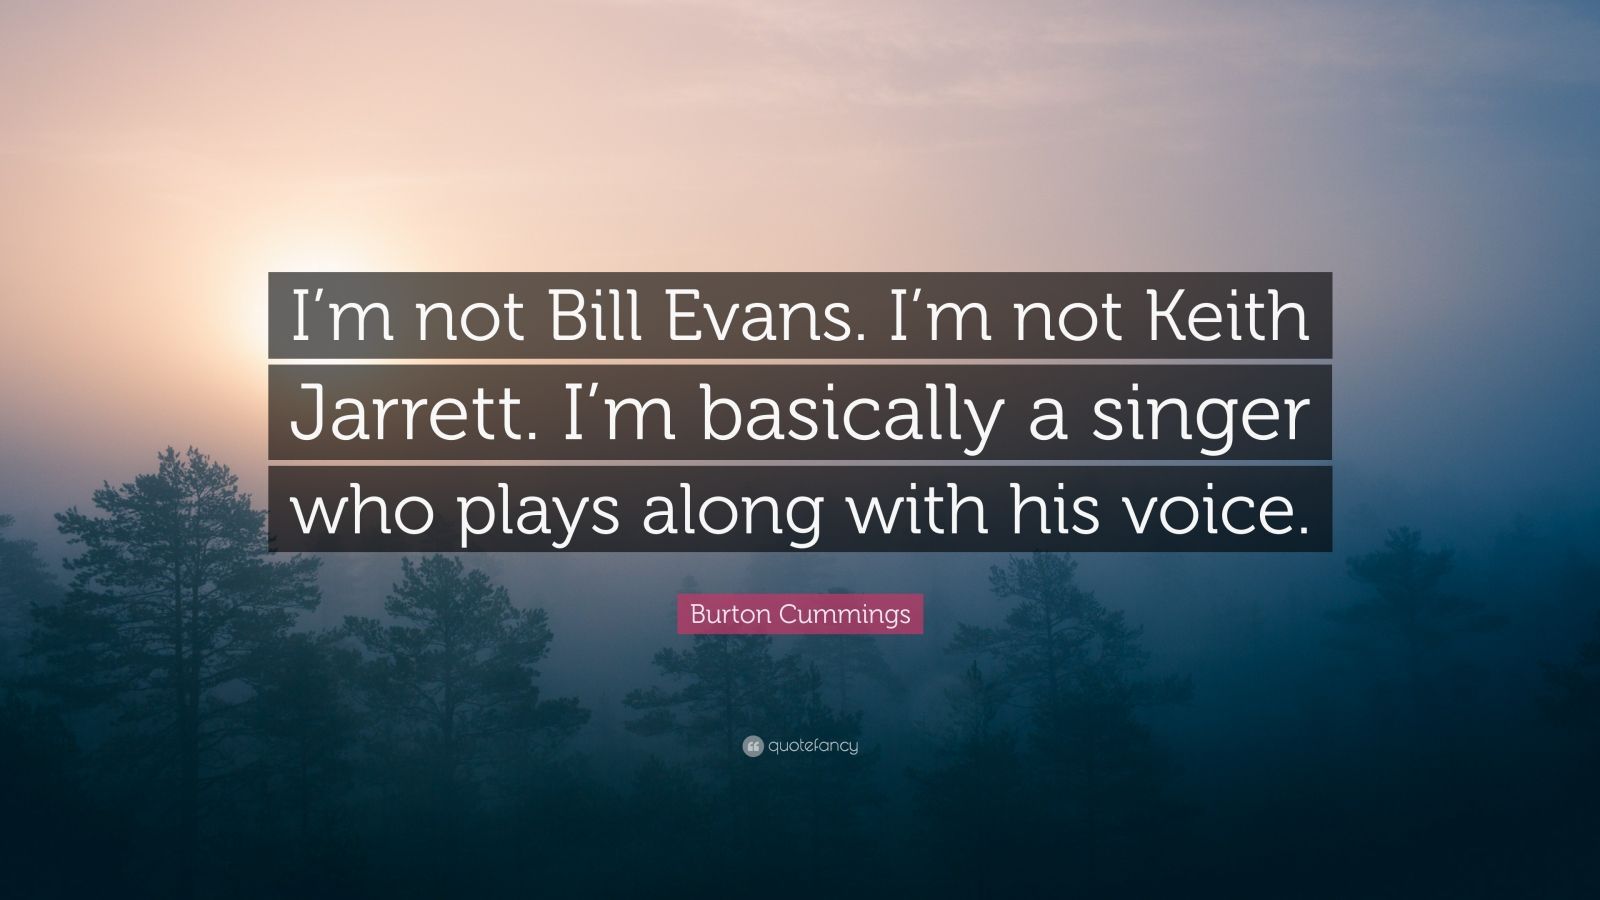 Burton Cummings Quote: “I'm not Bill Evans. I'm not Keith Jarrett. I'm basically a singer who plays along with his voice.” (7 wallpaper)